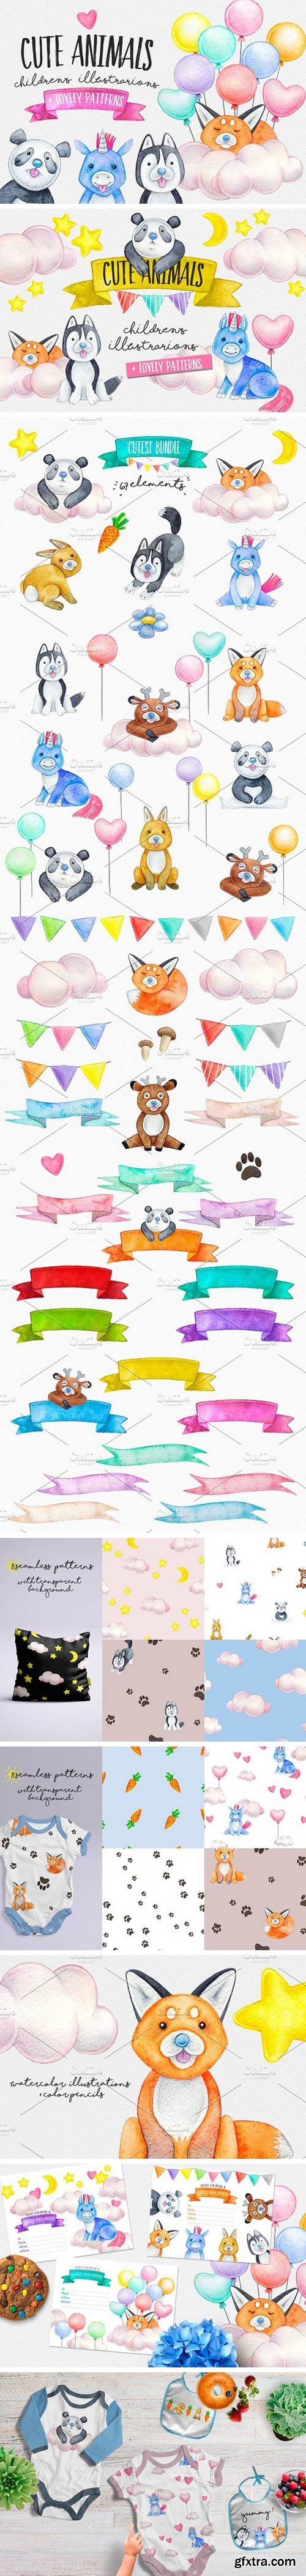 CUTE ANIMALS collection